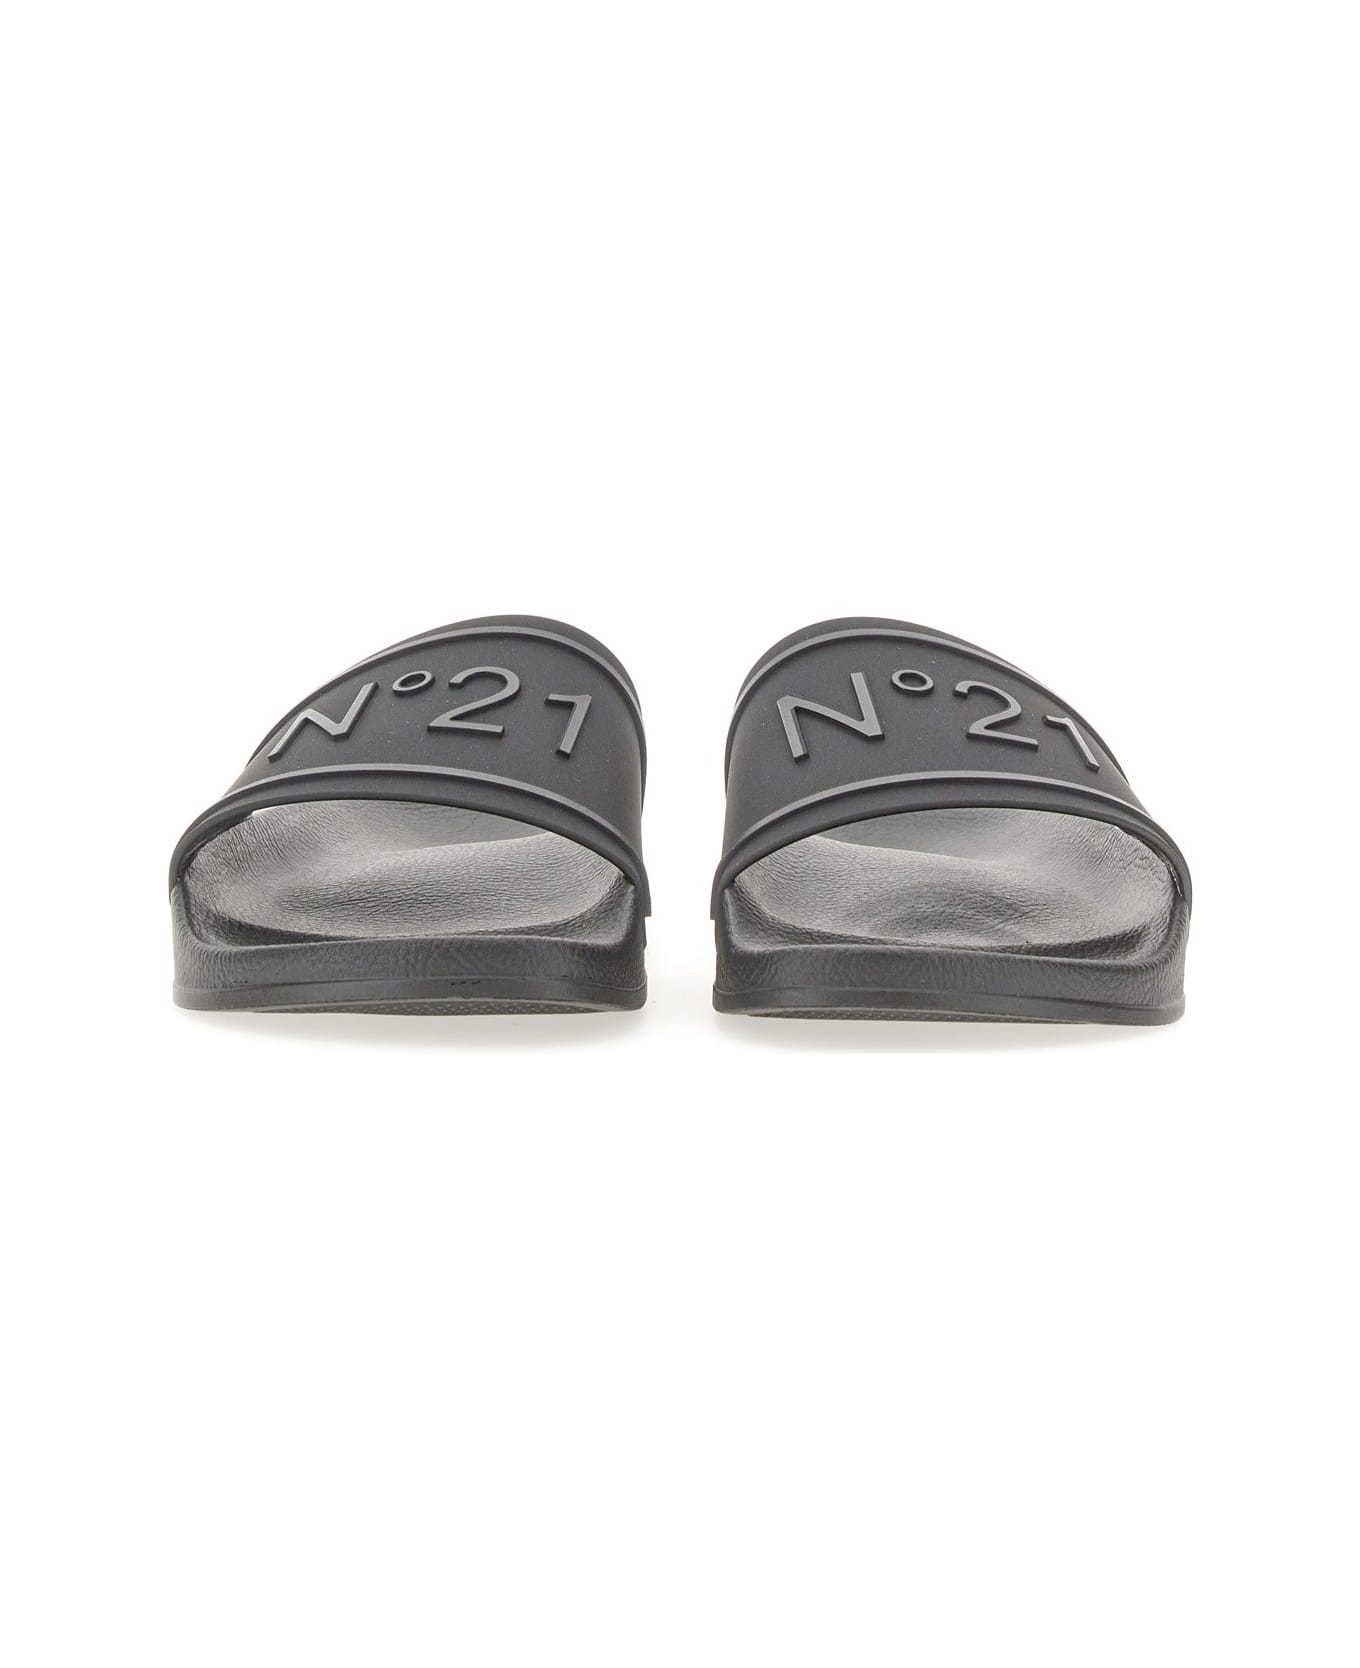 N.21 Rubber Slide With Logo - NERO